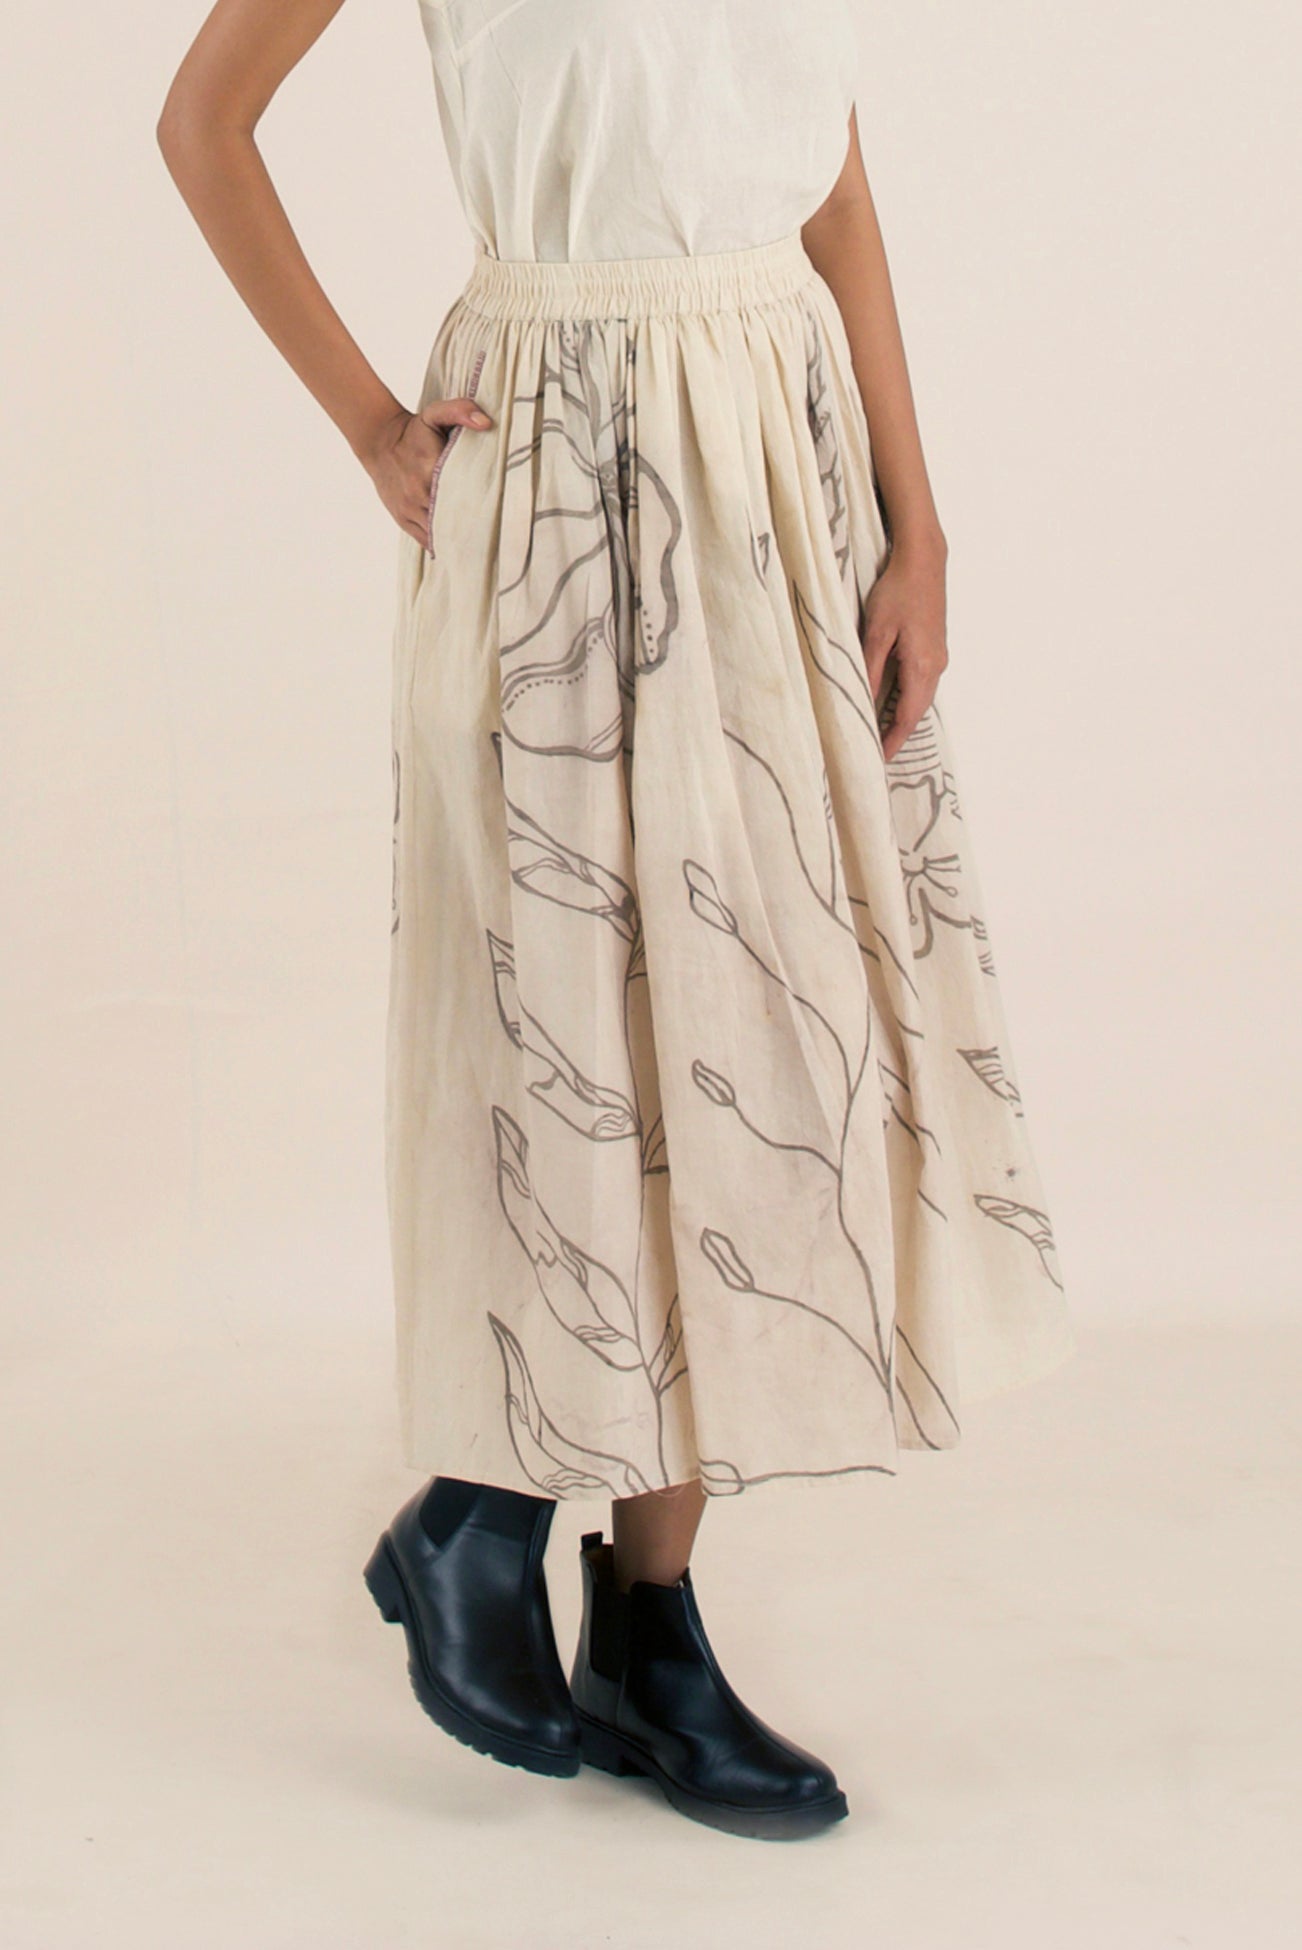 Dance hand painted off-white cotton flare midi skirt